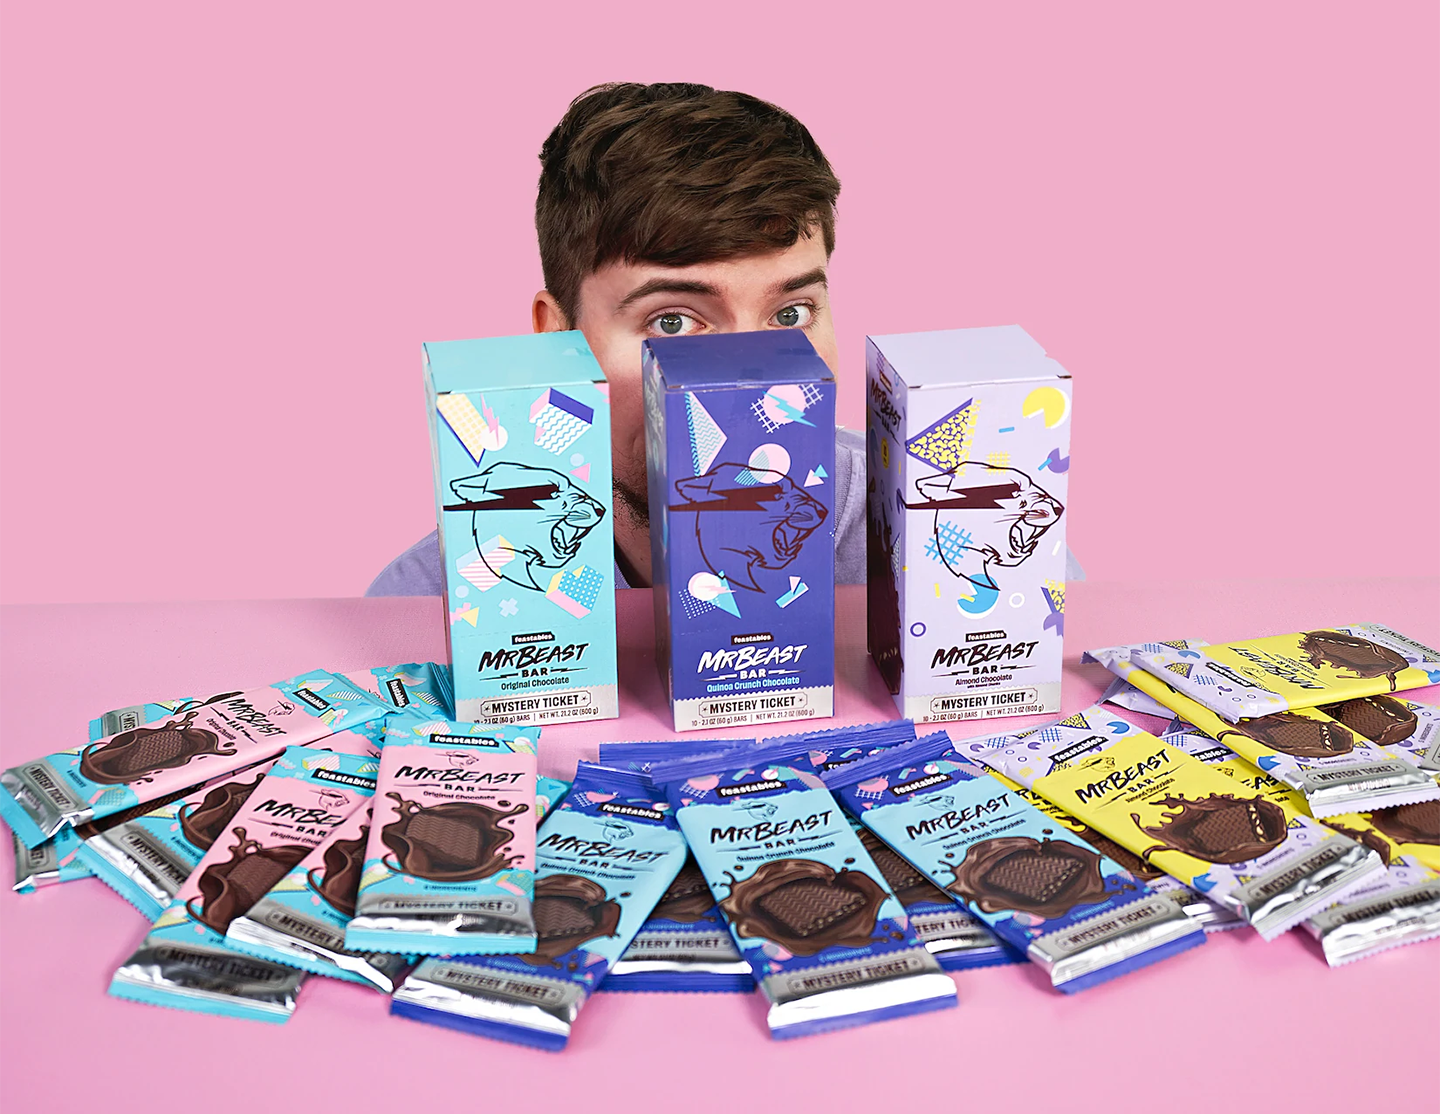 A photo of Jimmy Donaldson, A.K.A. MrBeast, with his Feastables branded chocolates.